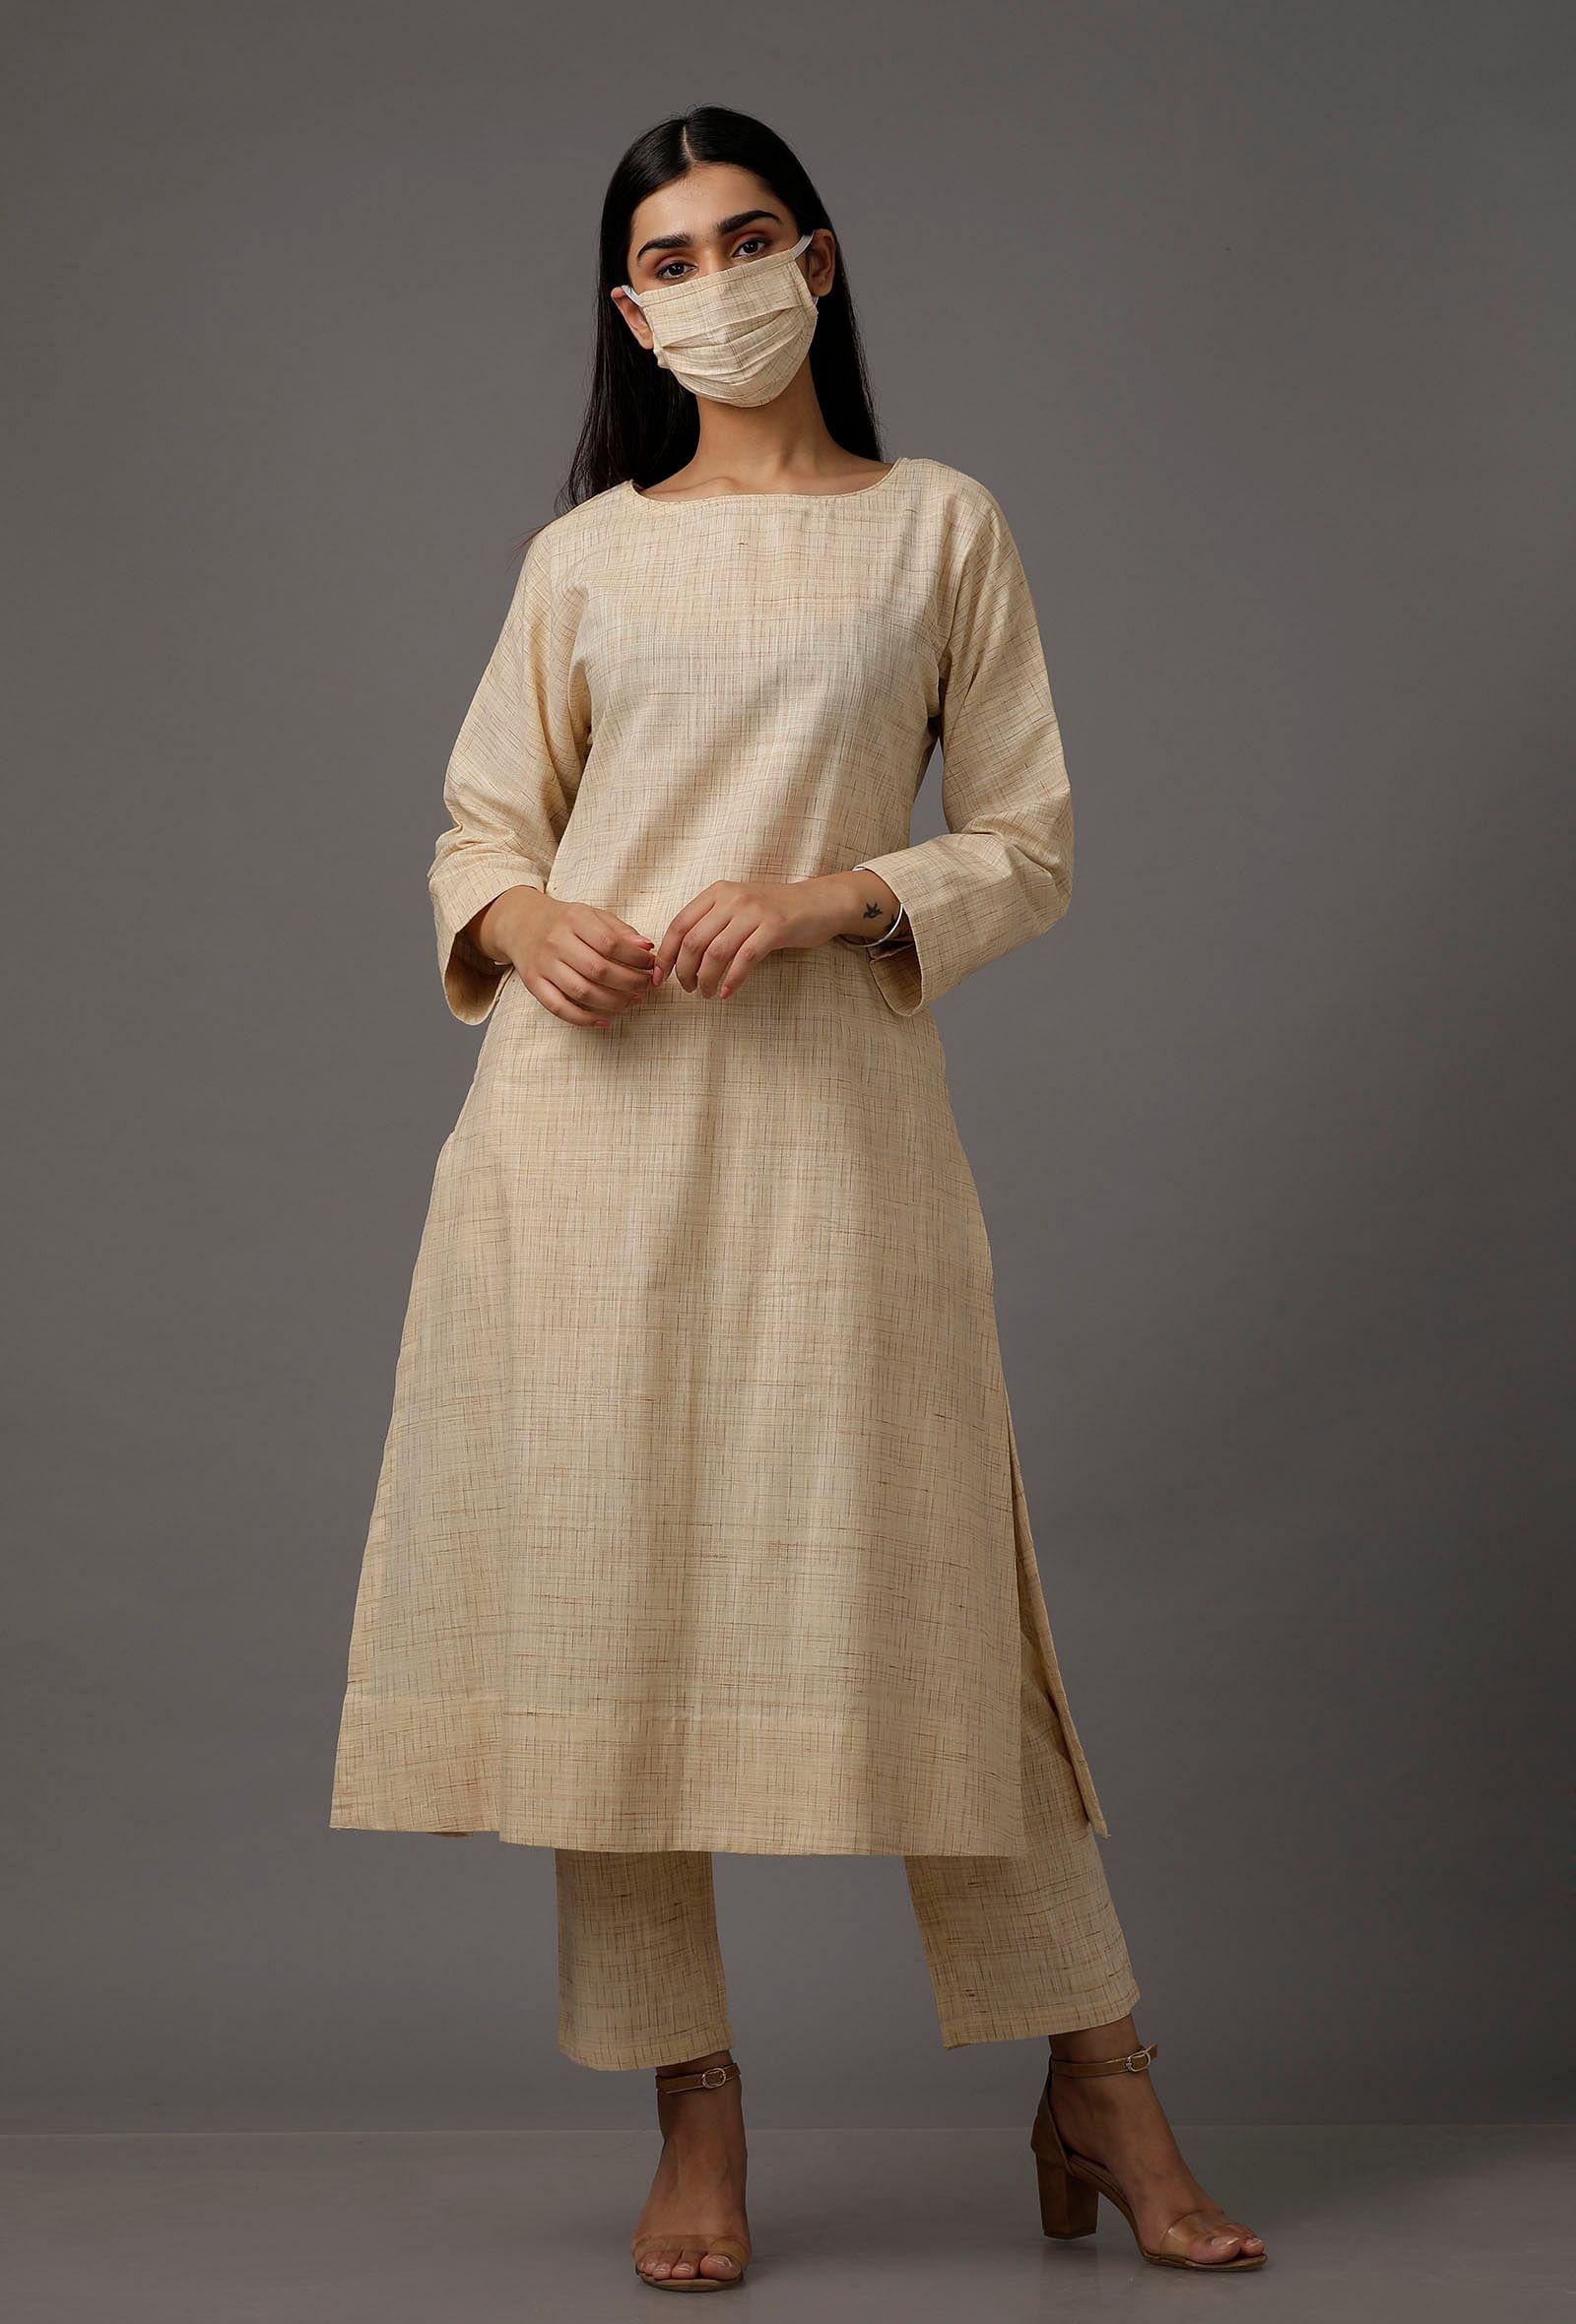 cream pure woven cotton kurta with complimentary matching mask